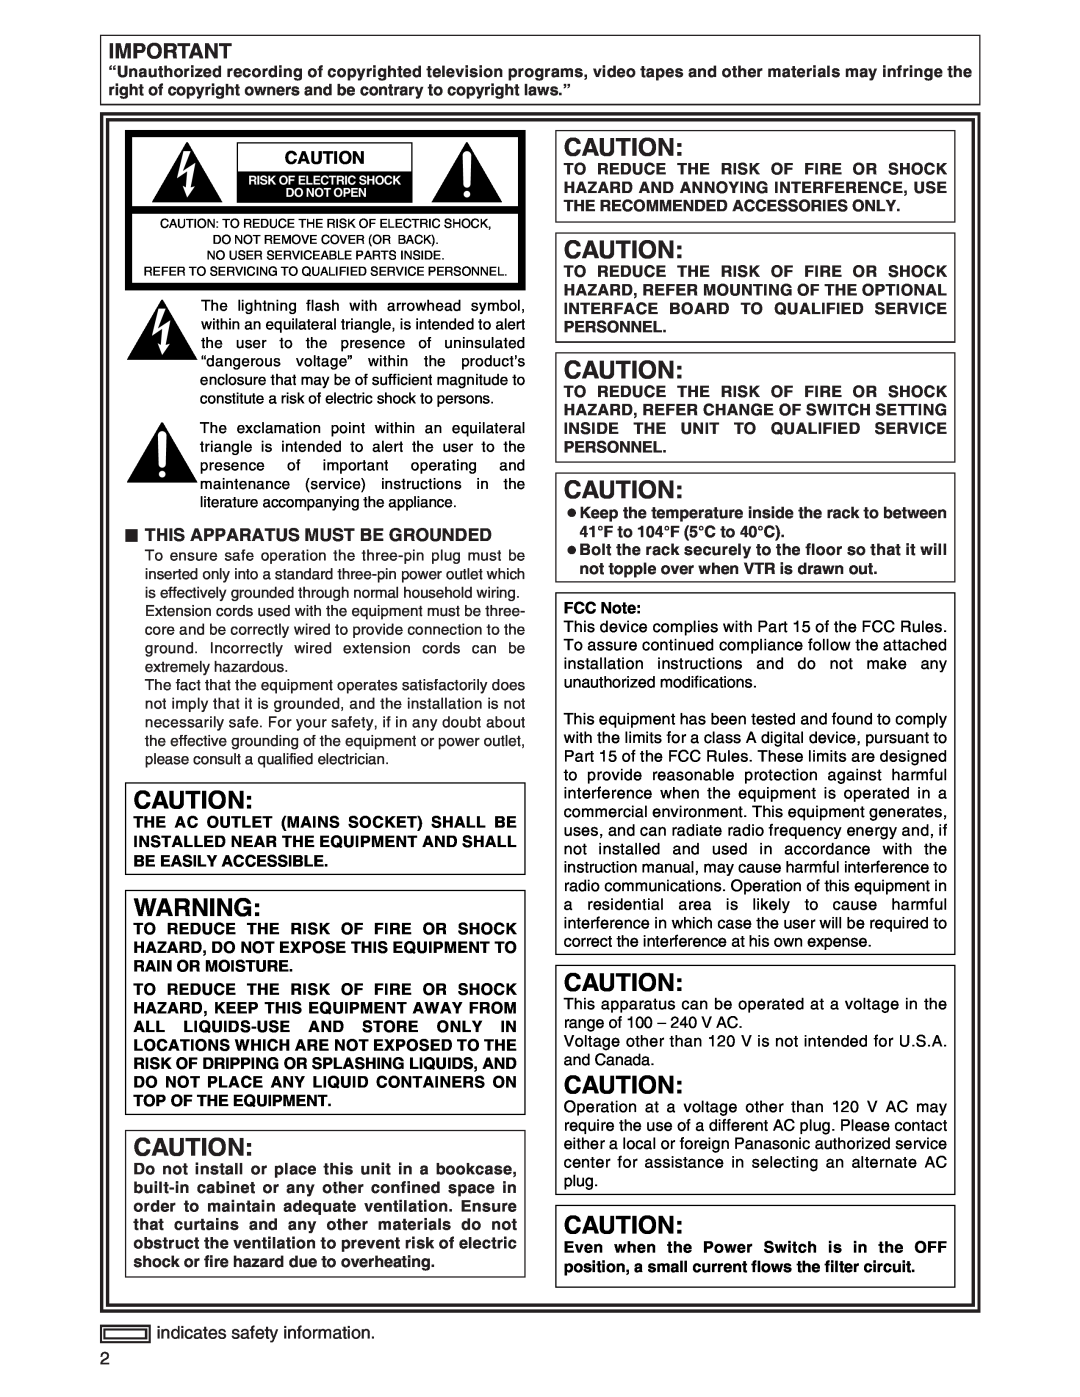 Panasonic AJ-SD755 operating instructions $ This Apparatus Must Be Grounded, indicates safety information 